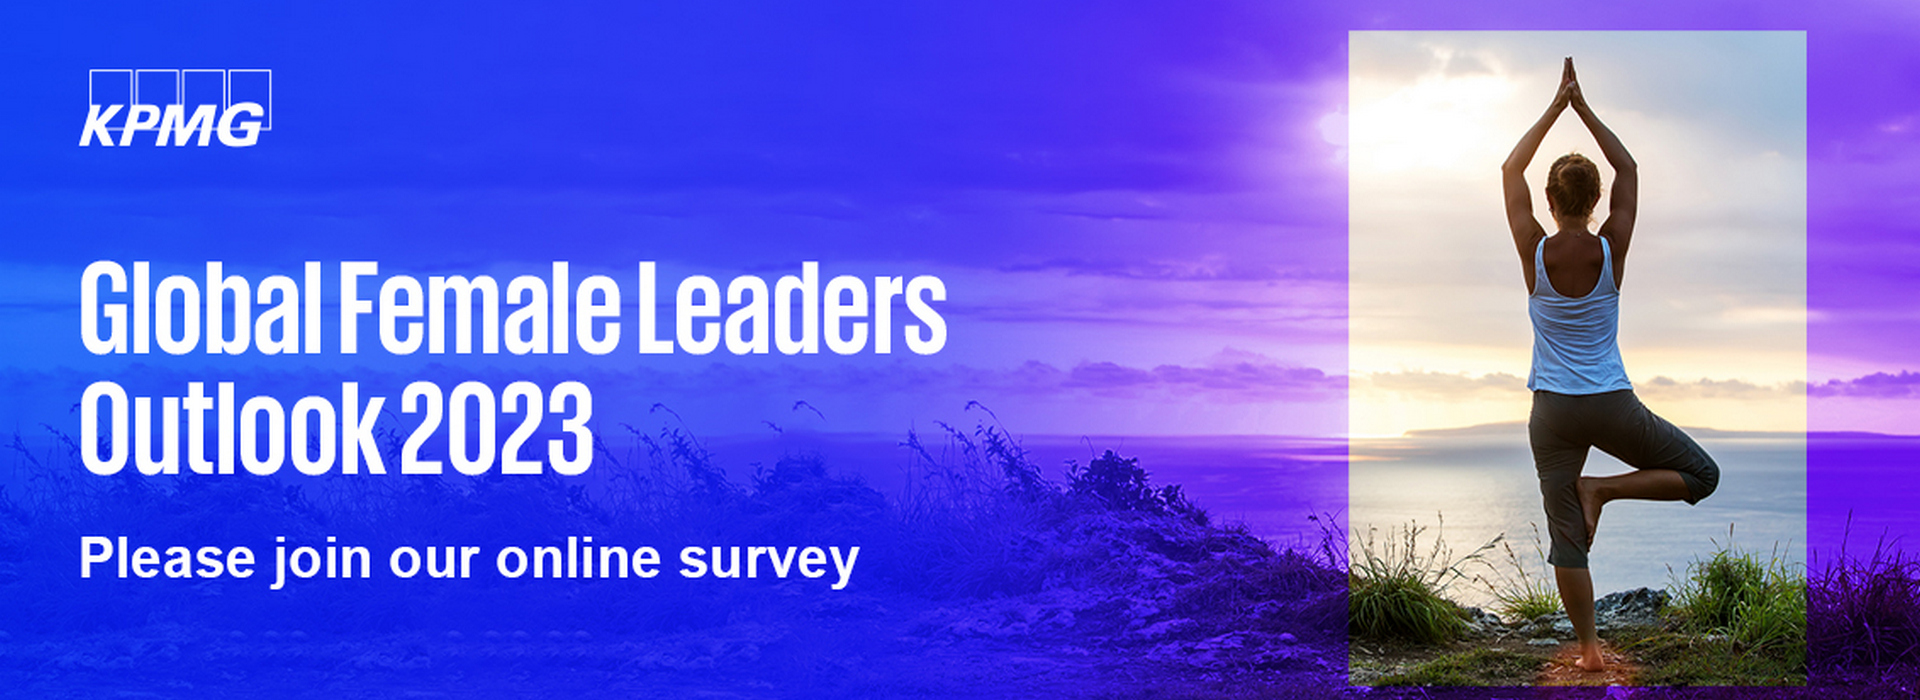 KPMG Global Female Leaders Outlook 2023 Survey Is Now Open Till May 21